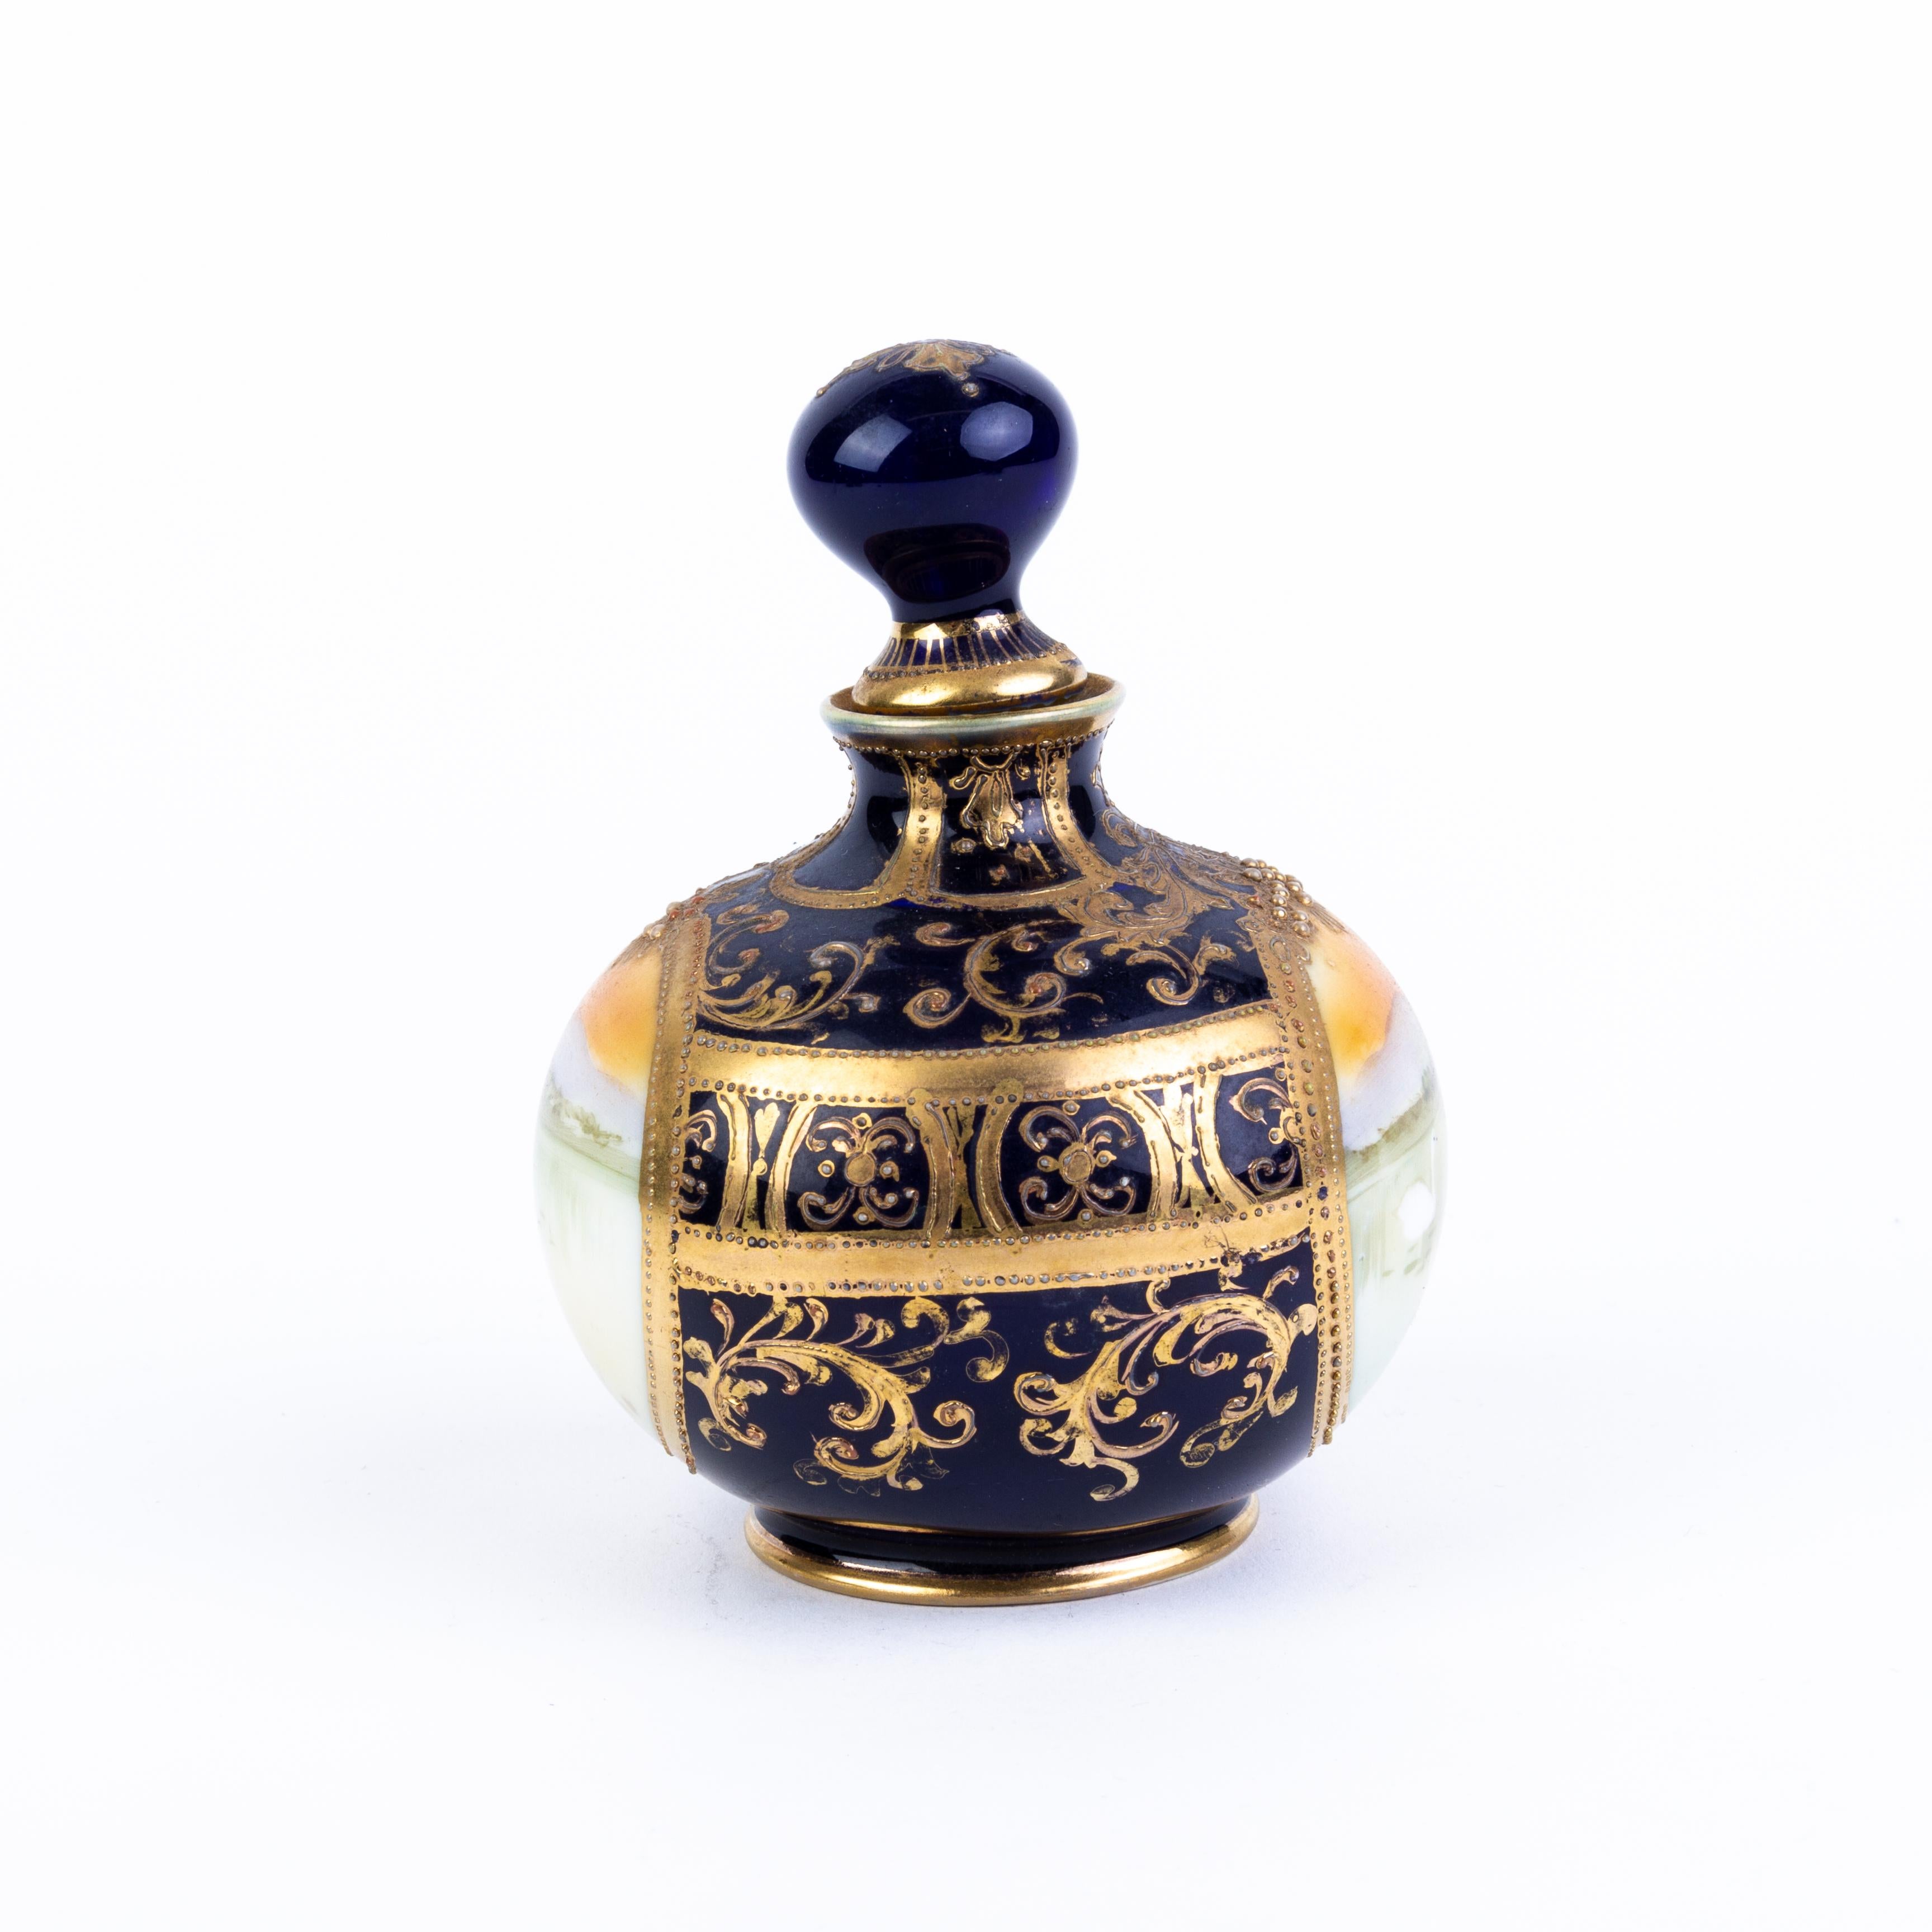 Japanese Noritake Fine gilt Porcelain Art Deco Lidded Perfume Scent Bottle
Good condition
From a private collection.
Free international shipping.